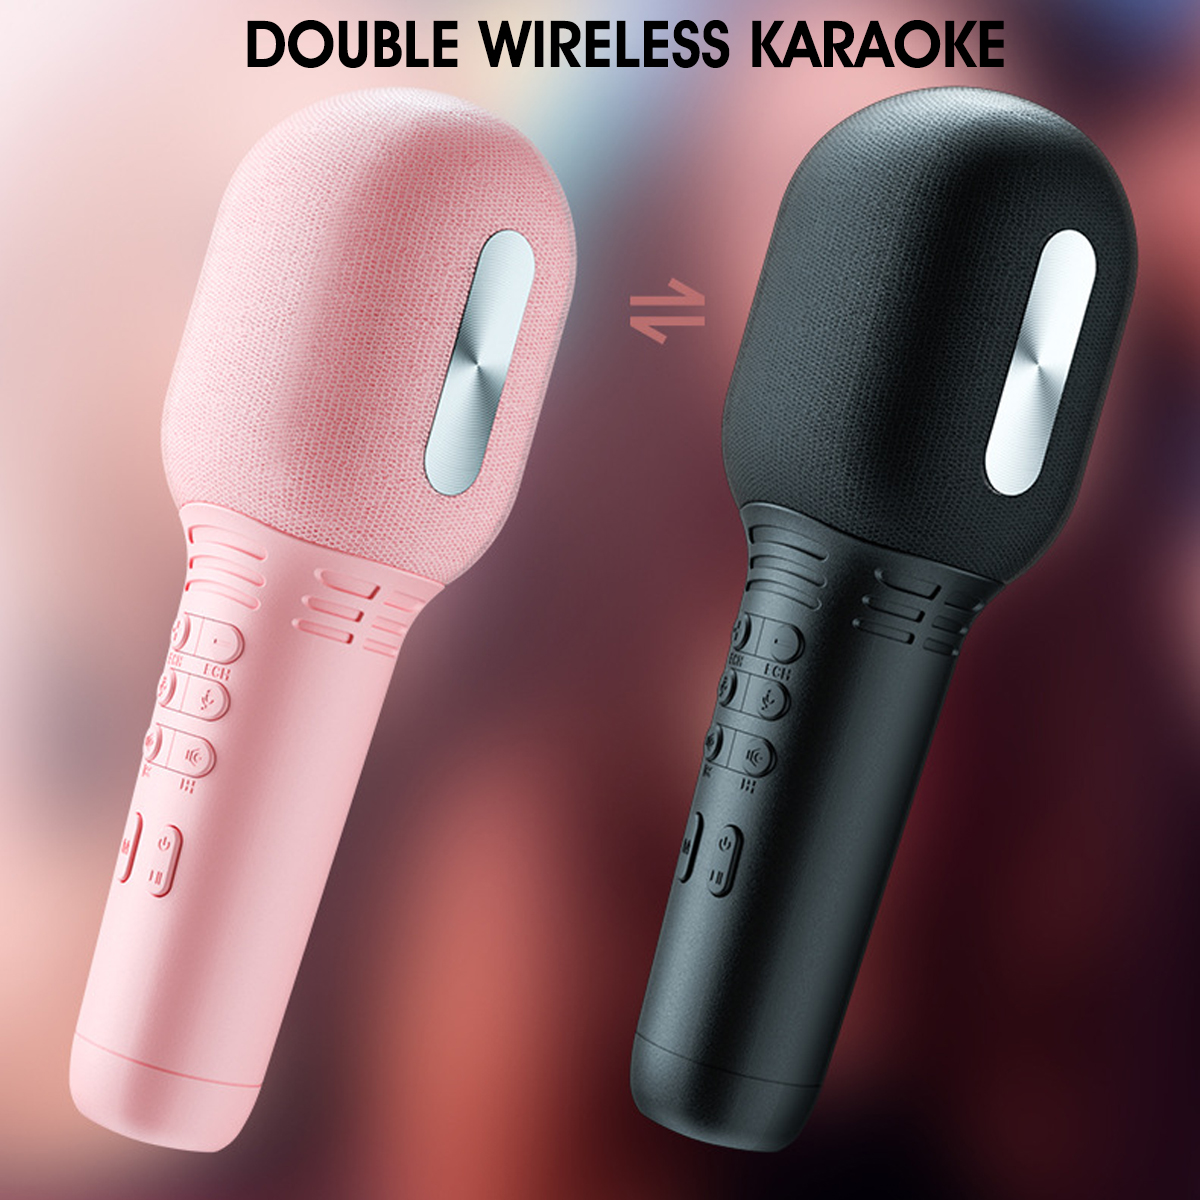 Wireless-Microphone-bluetooth-V50-Low-Latency-1800mAh-Battery-Portable-Audio-Video-Recording-Mic-for-1965351-4